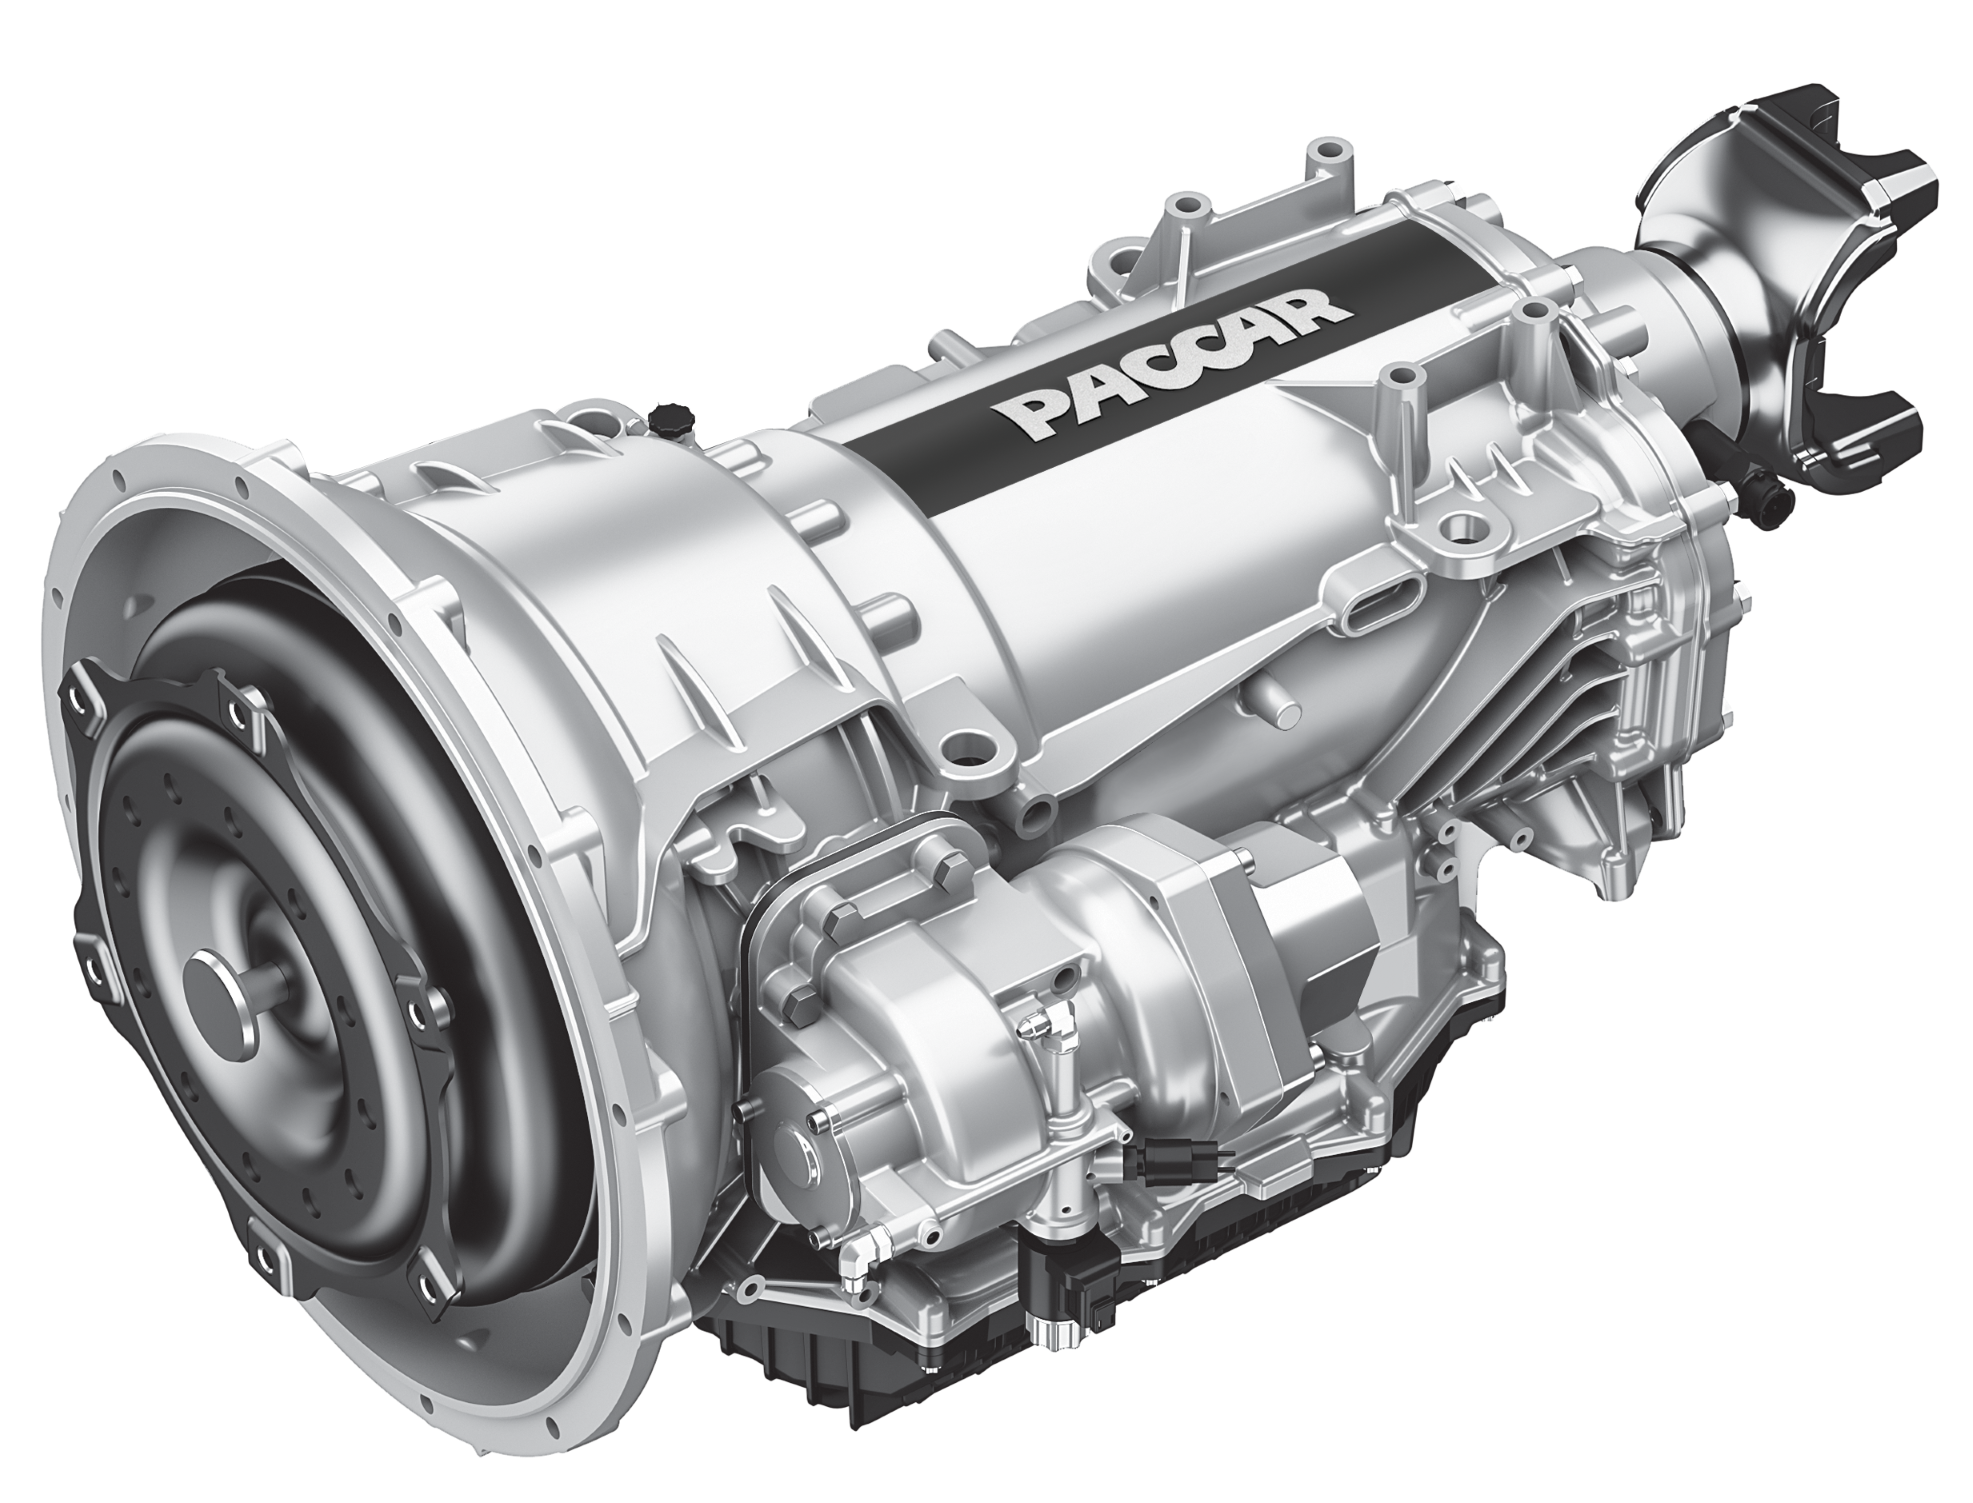 Peterbilt Introduces New Mobile PTO Functionality with PACCAR TX-8 Automatic Transmission - Hero image